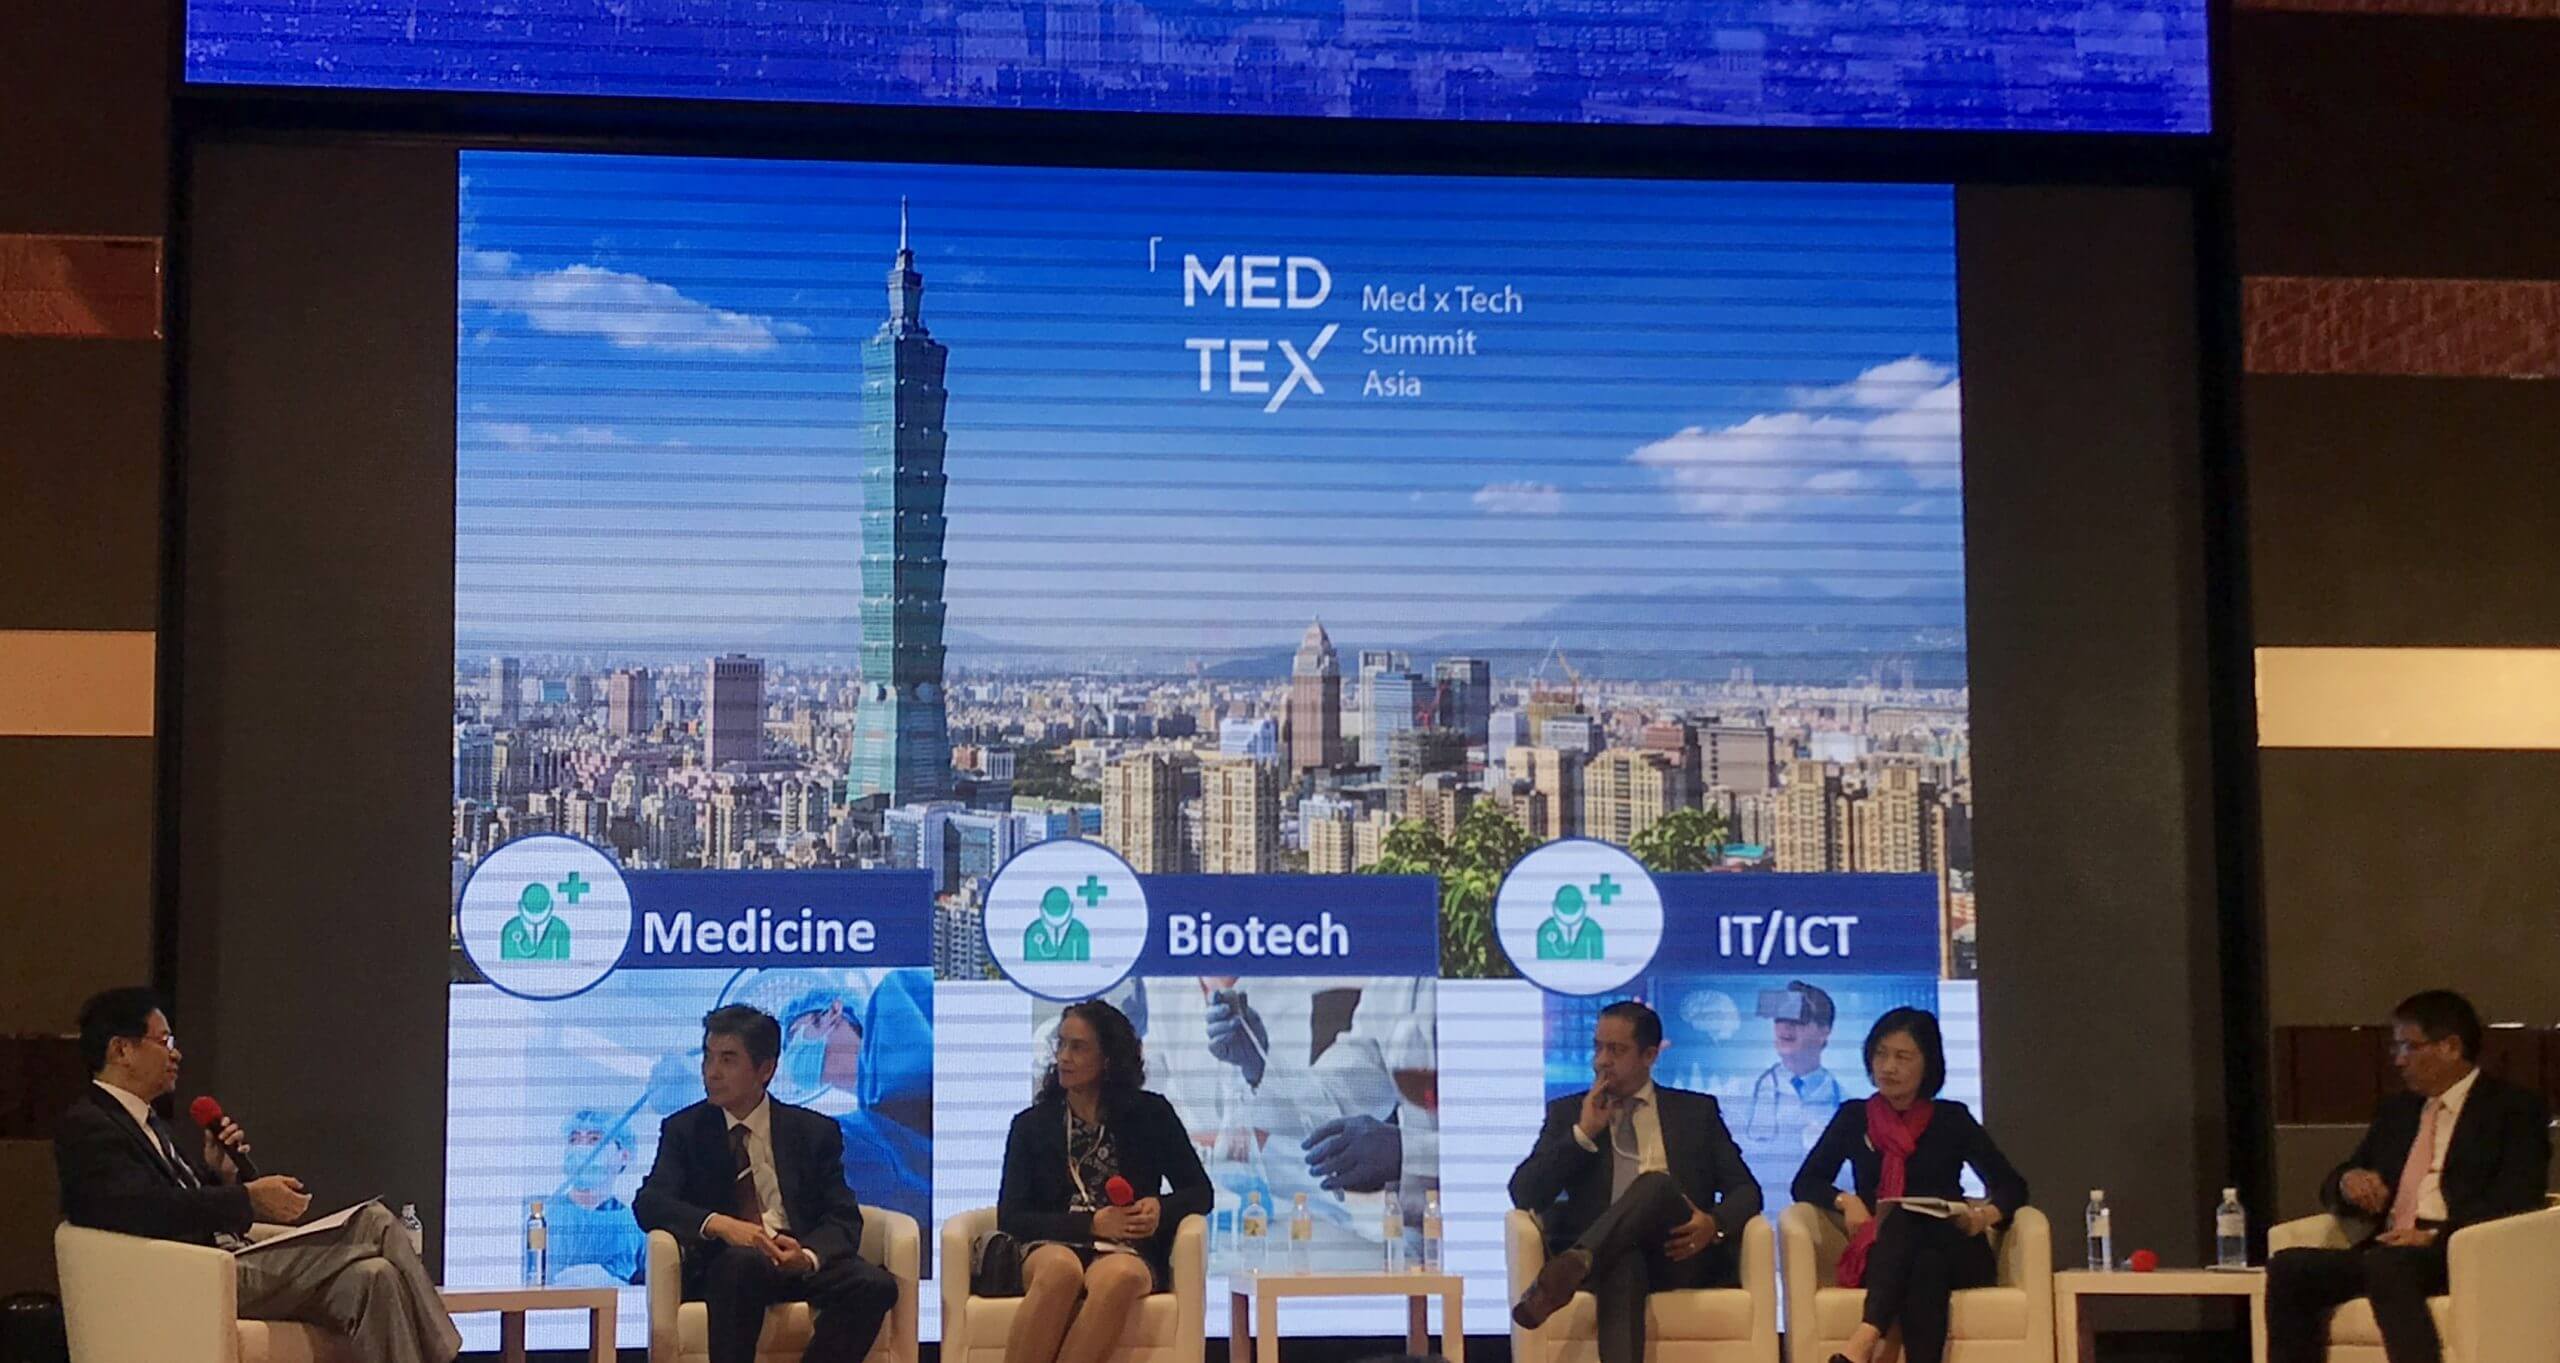 Leaders from pharmaceutical and IT companies, including Merck, Teva, Hitachi, NVIDIA, and Qisda talked about the future of healthcare industry and intersectional possibilities. (Photo credit/GeneOnline)